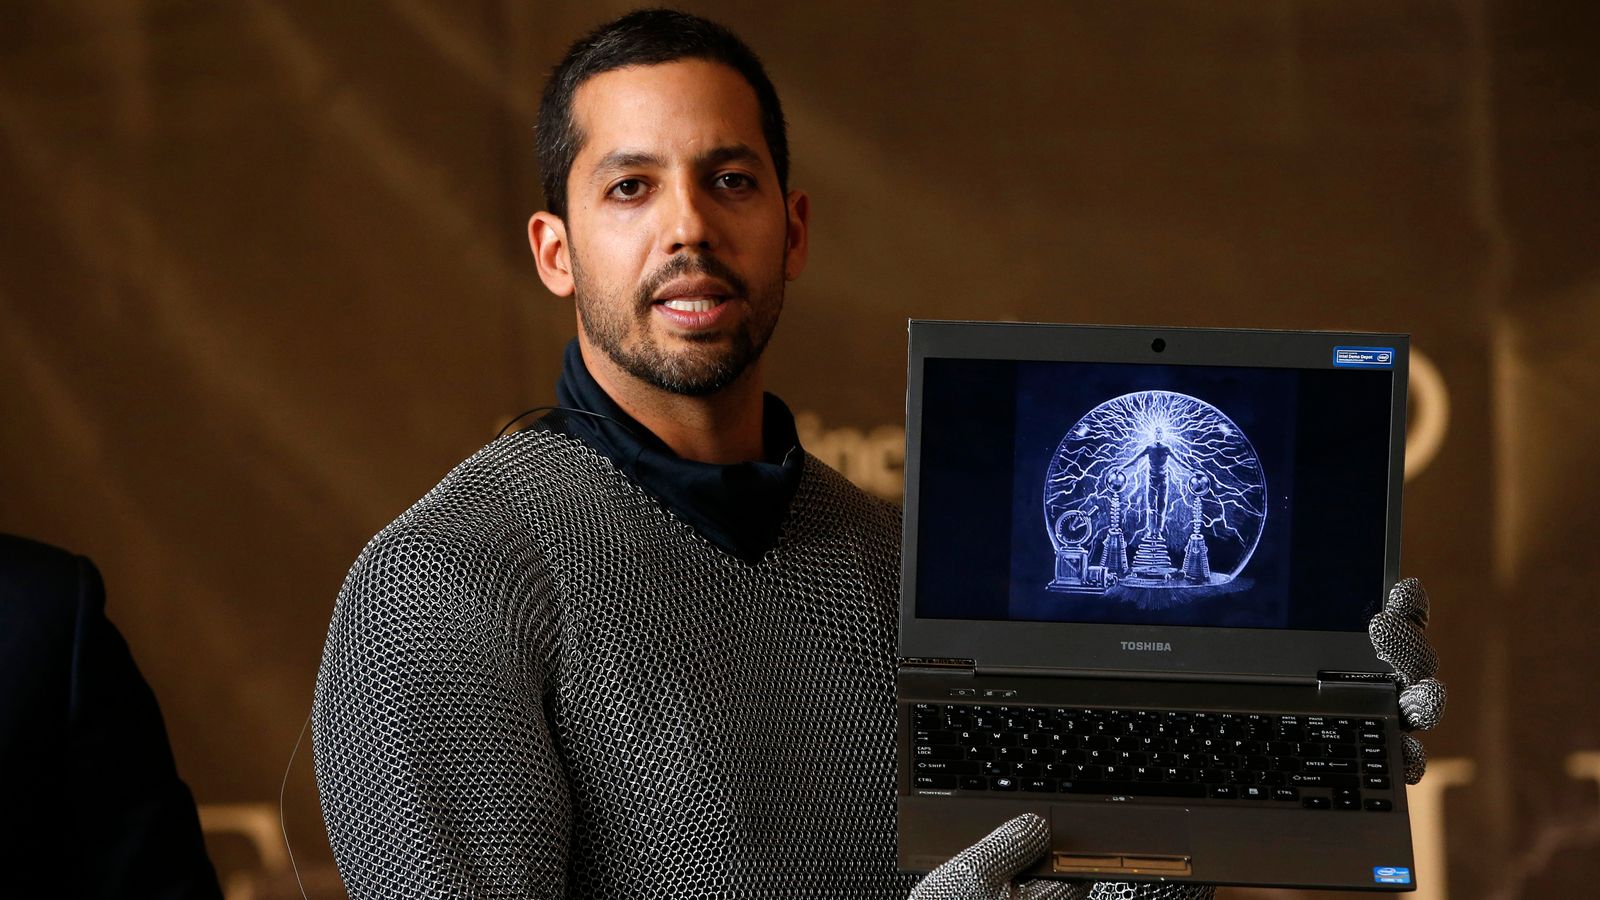 David Blaine New York police investigate magician over sexual assault